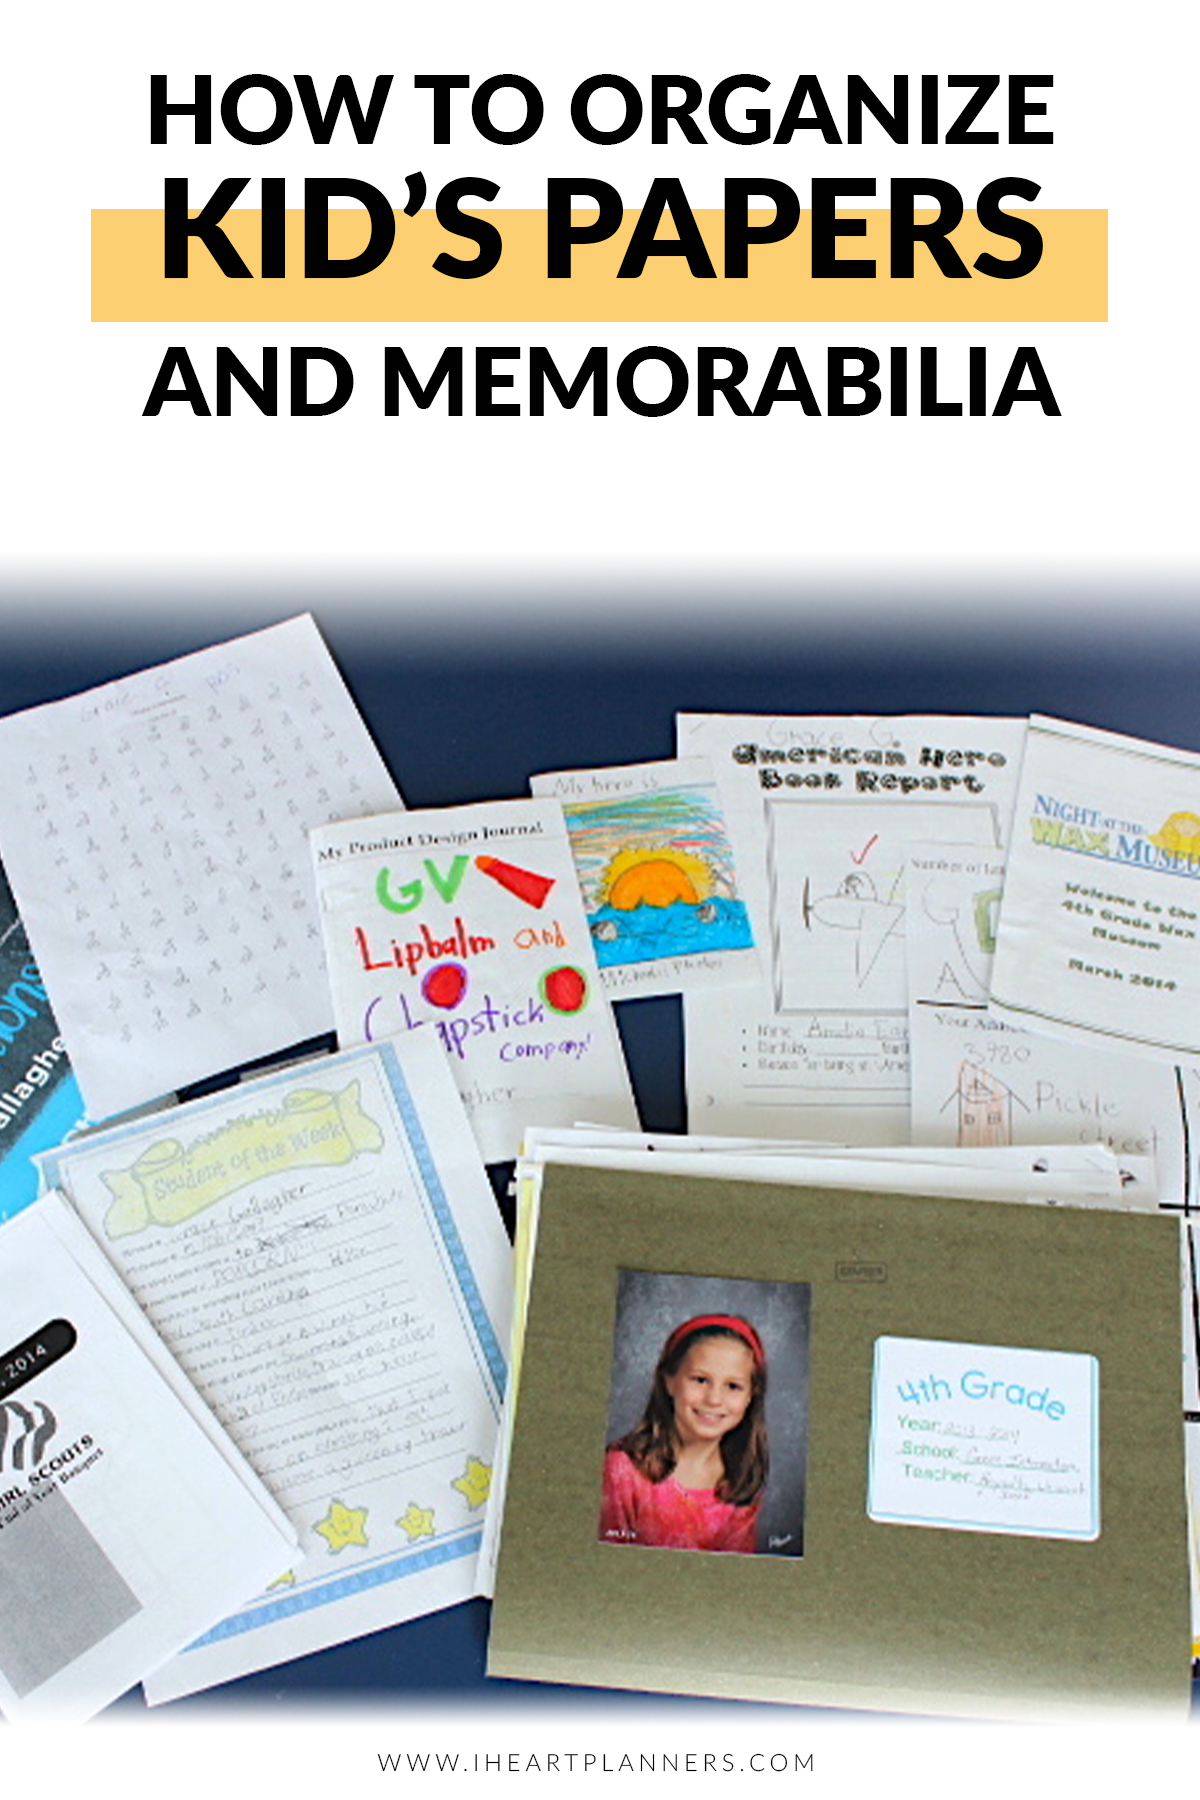 How to Organize Your Kids' School Papers - Organize by Dreams